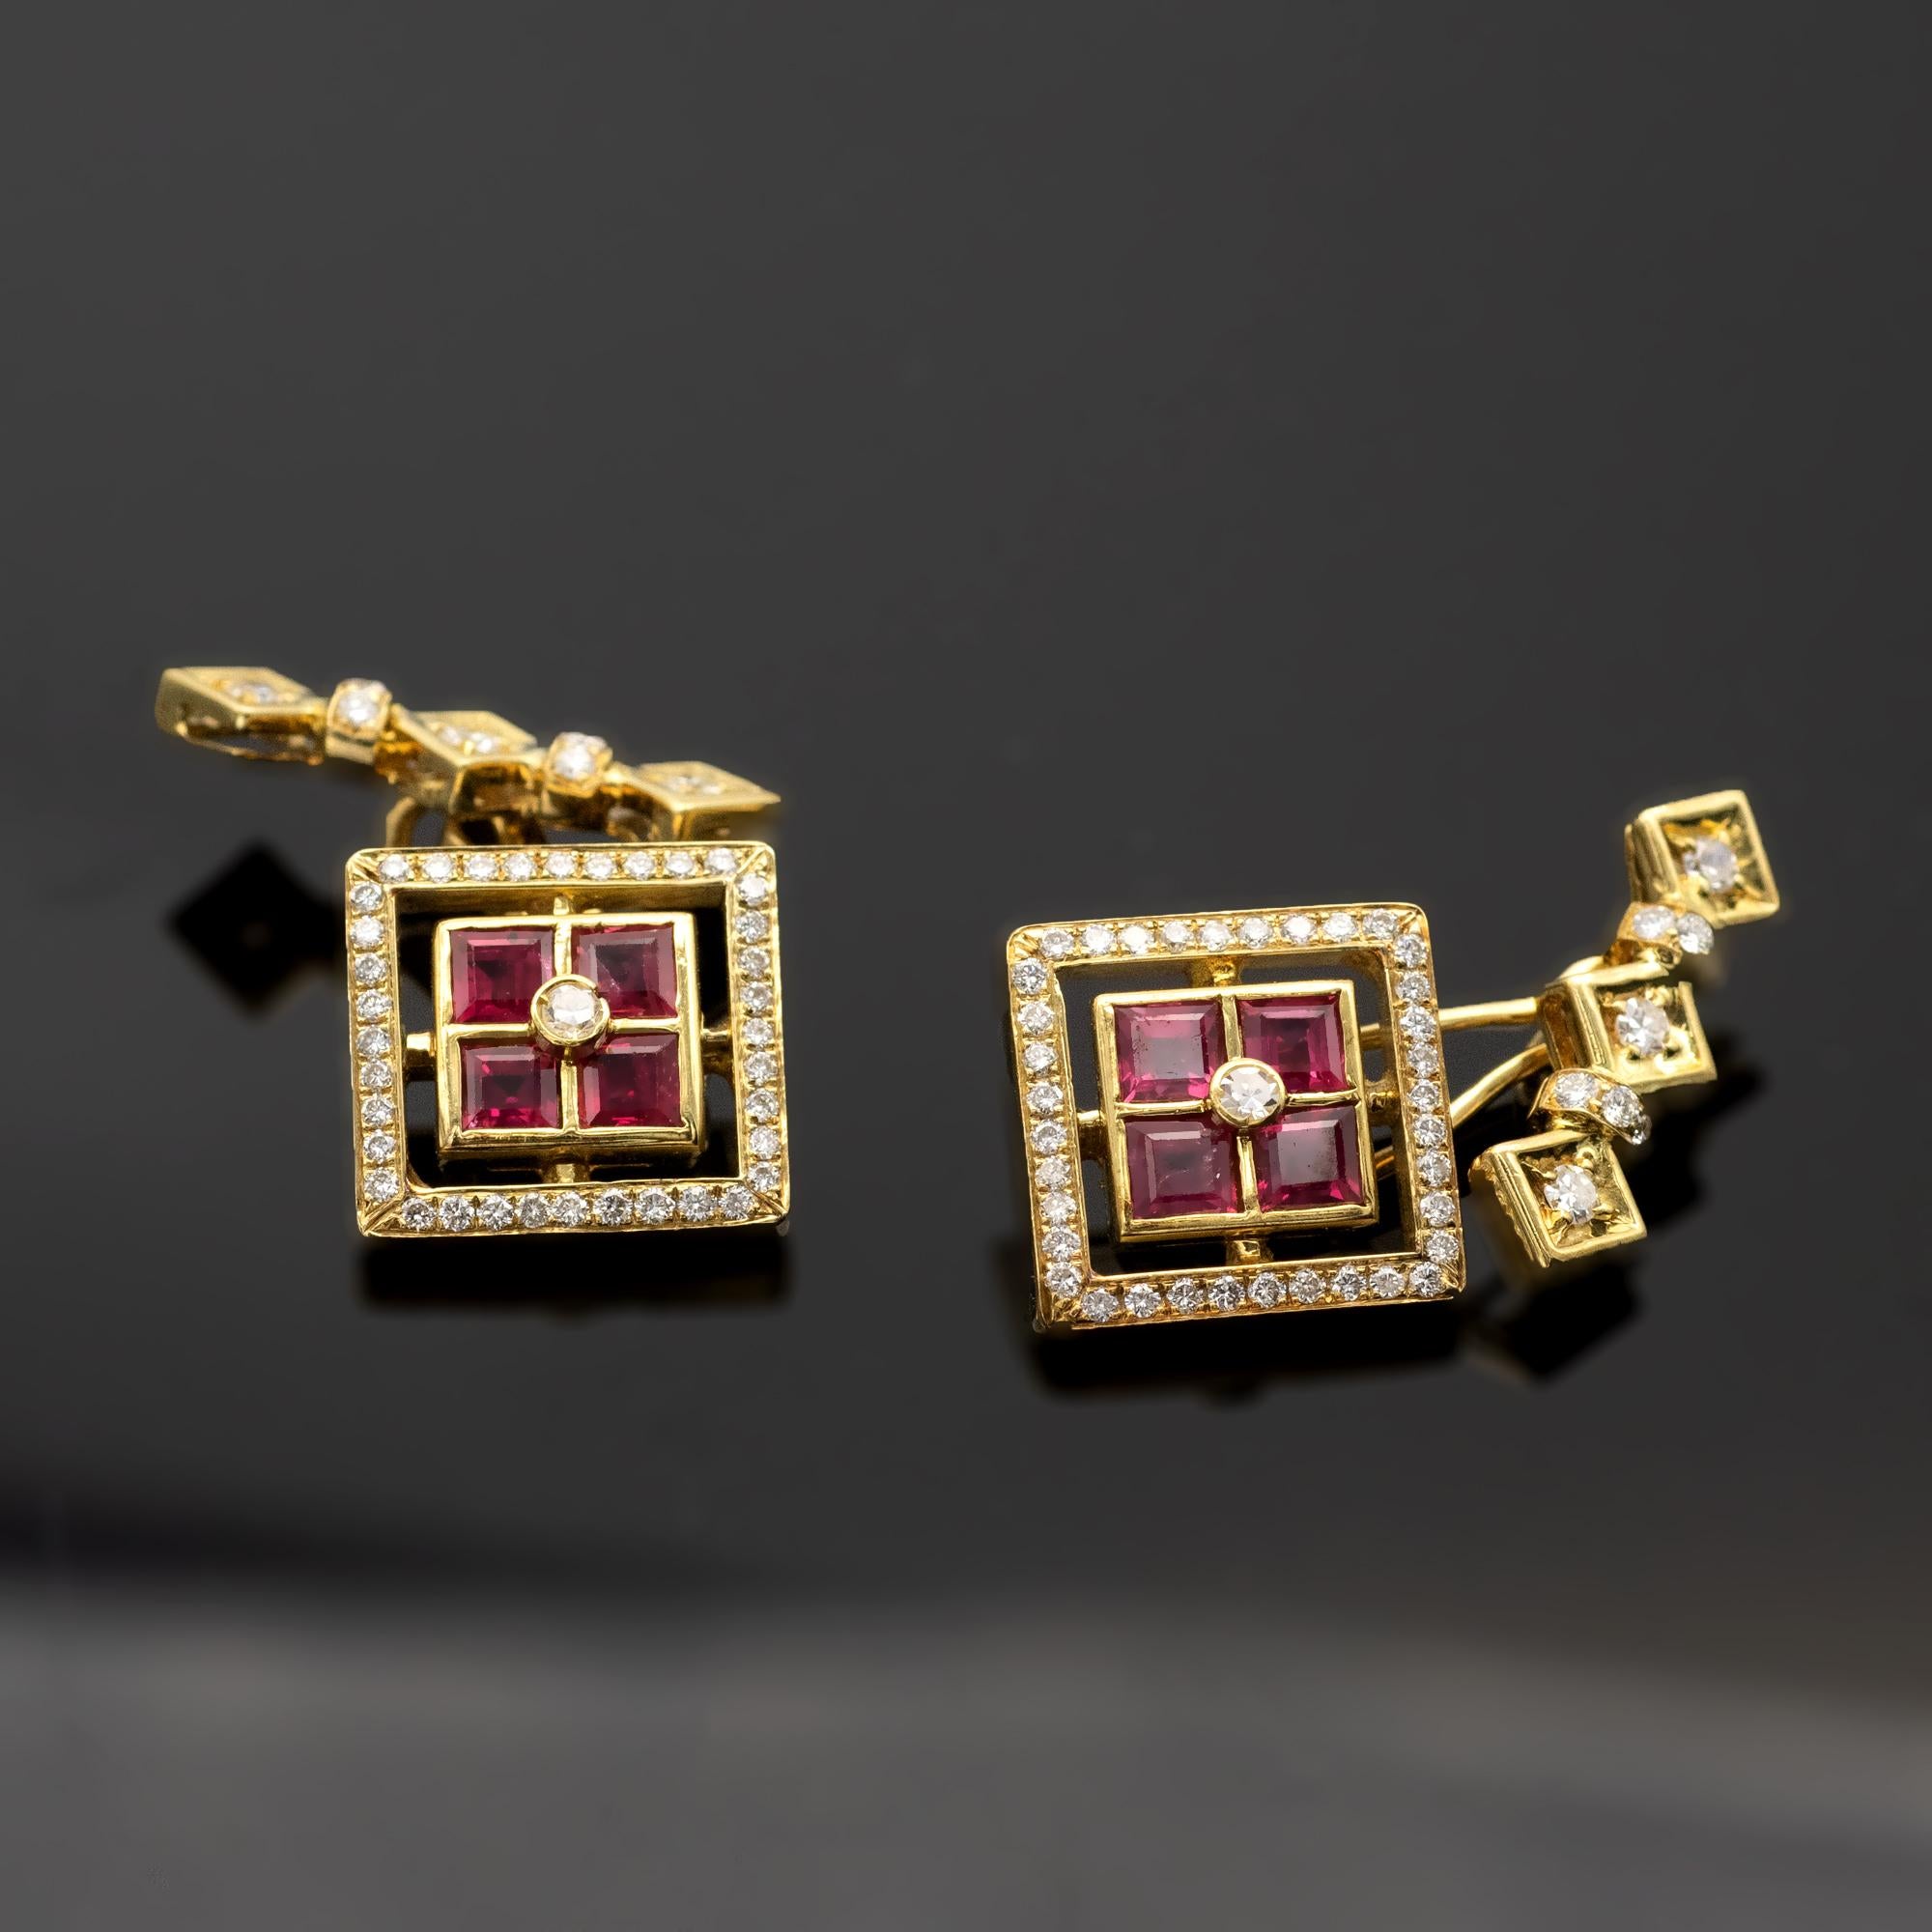 Four square rubies with a diamond nested in their midst in a square classy design on the frame around it 36 diamonds makes it even more precious. On the back to hold the cufflink in place three diamonds are set in three squares. excellent work.